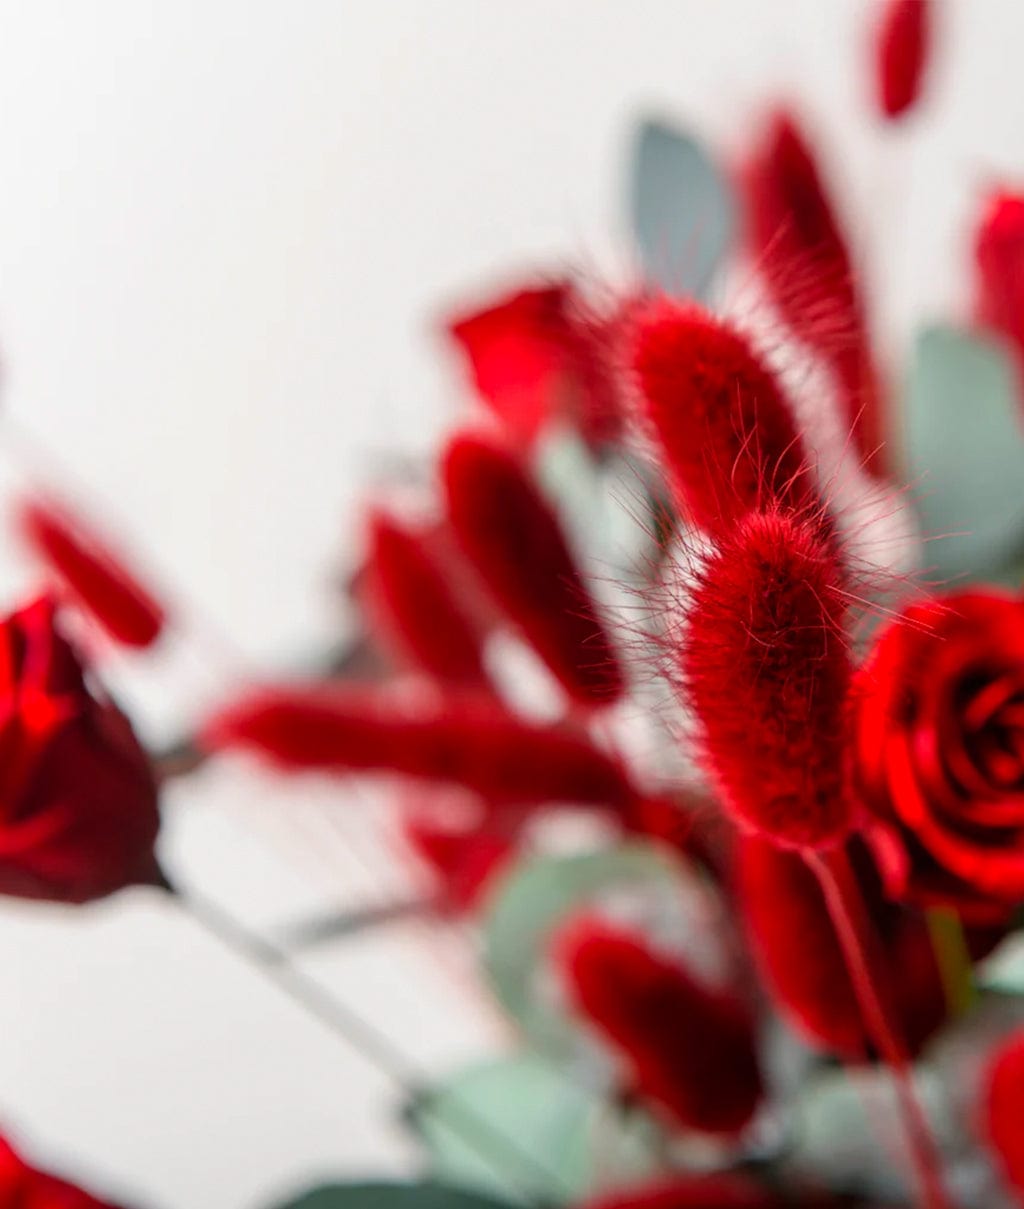 Scarlet Bouquet of Naturally Long-Lasting Flowers